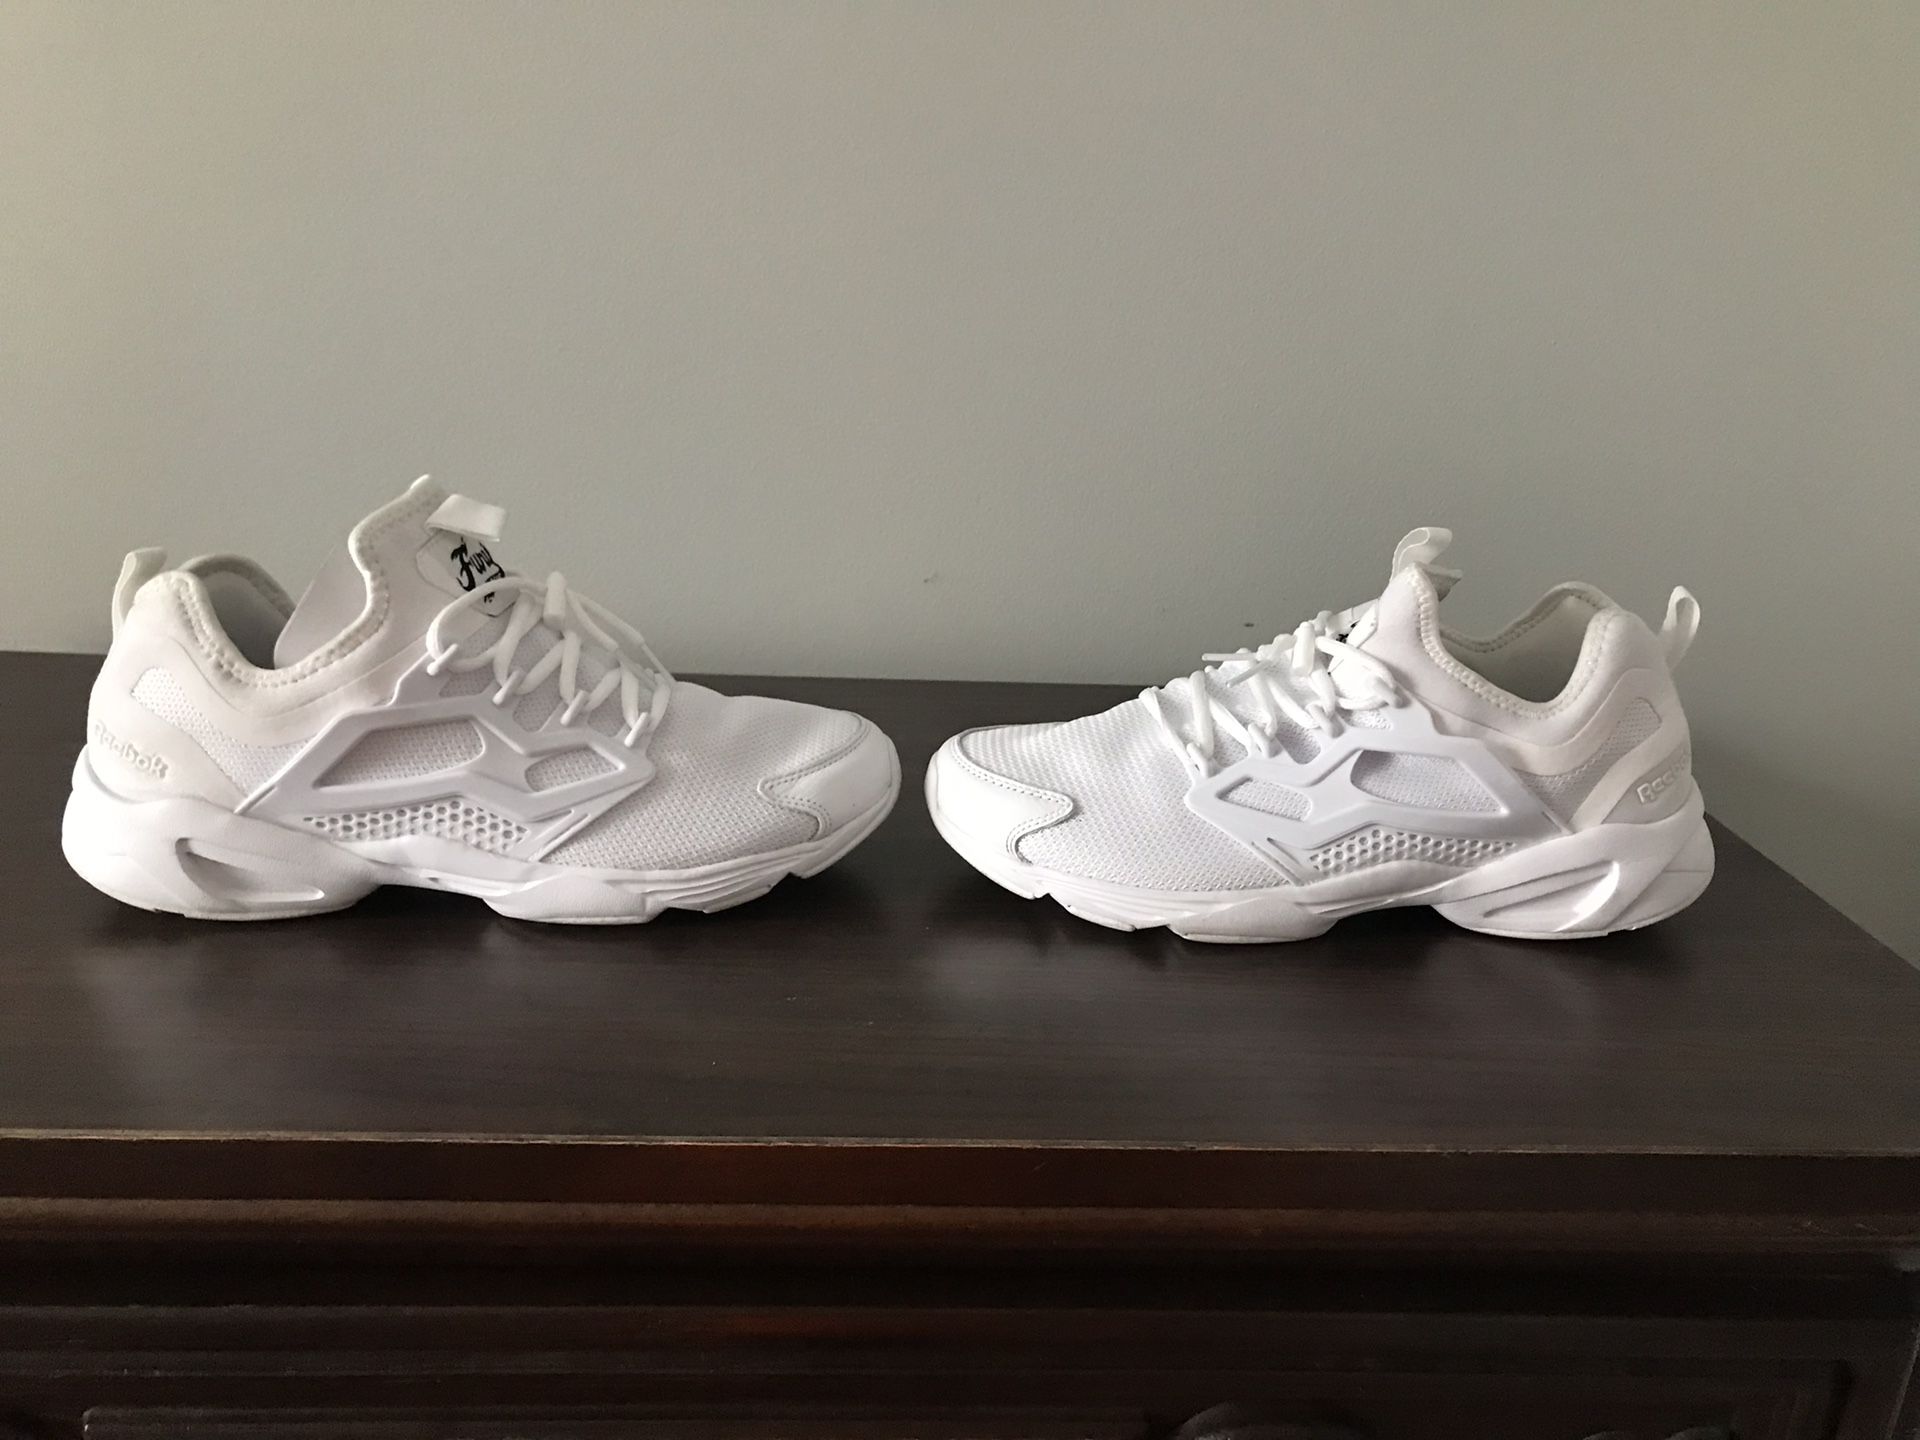 All white Reebok’s like new worn once